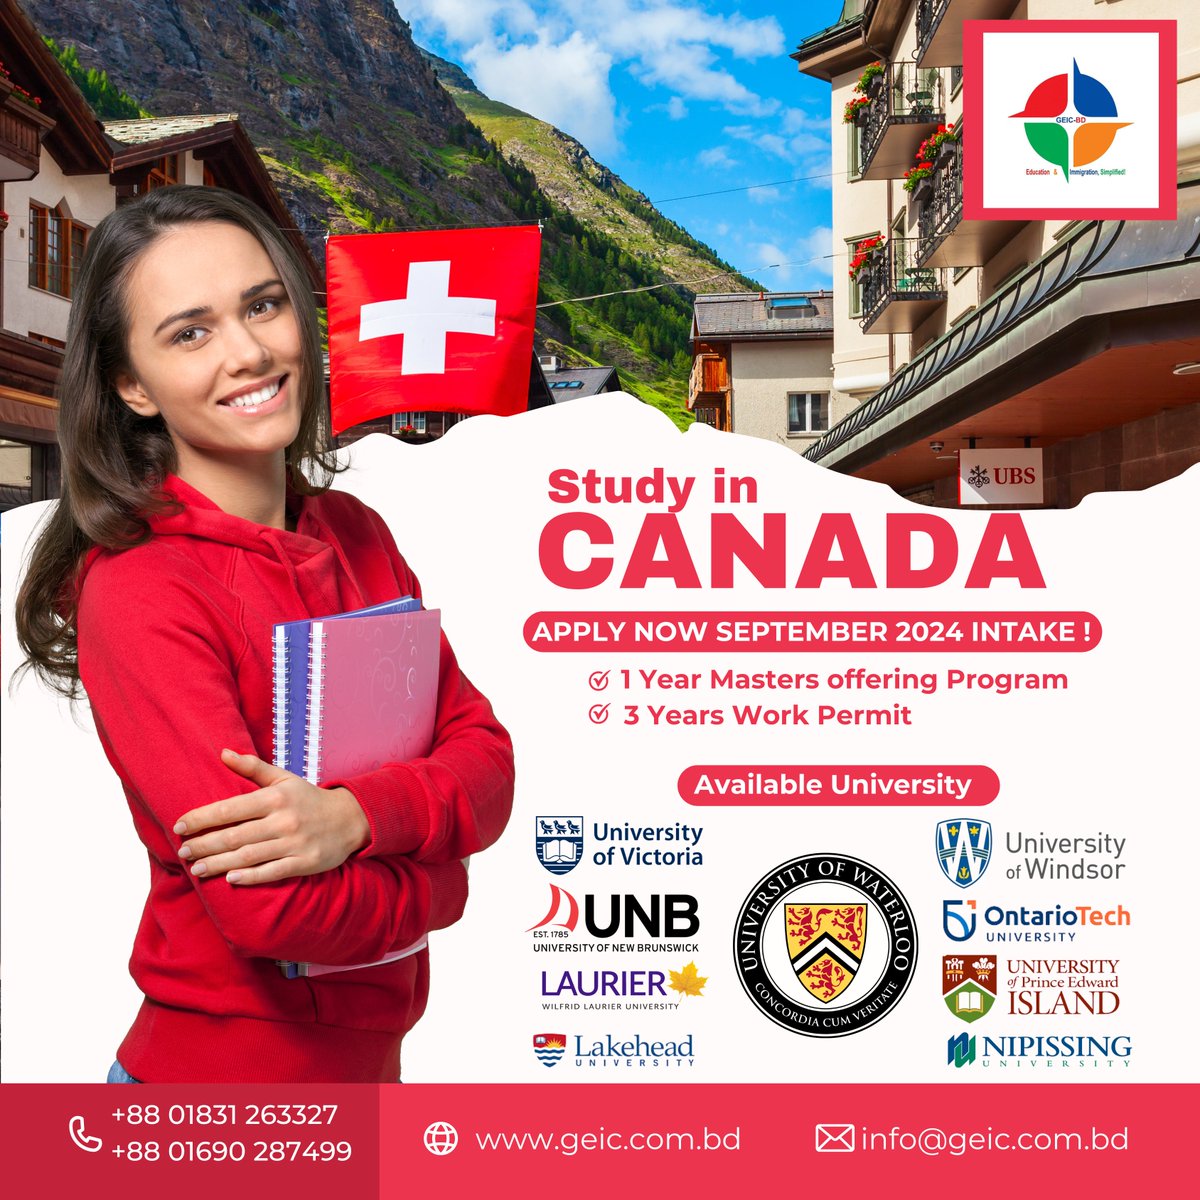 Study in Canada With top ranked university in Canada for master’s program. #study #studyabroad #studyabroadlife #studymotivation #studyincanada #studyinCANADA2024 #studyincanada📷 #studyincanadanow